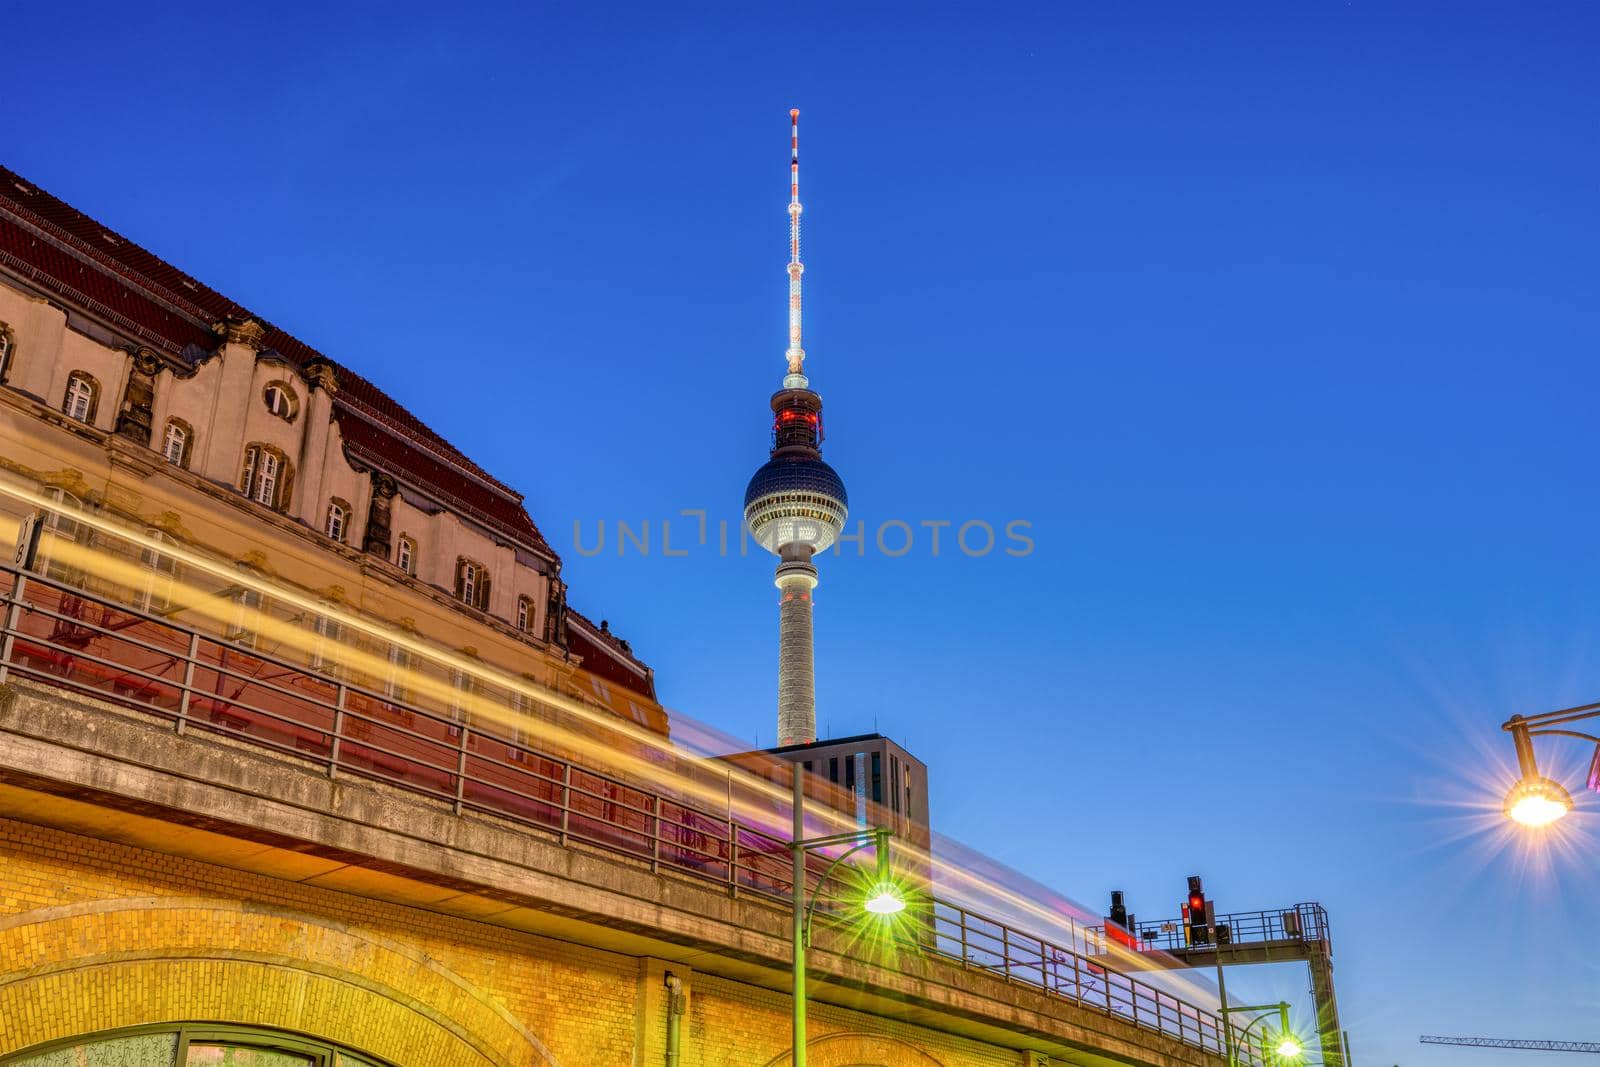 The iconic TV Tower in Berlin at dusk with a motion blurred commuter train